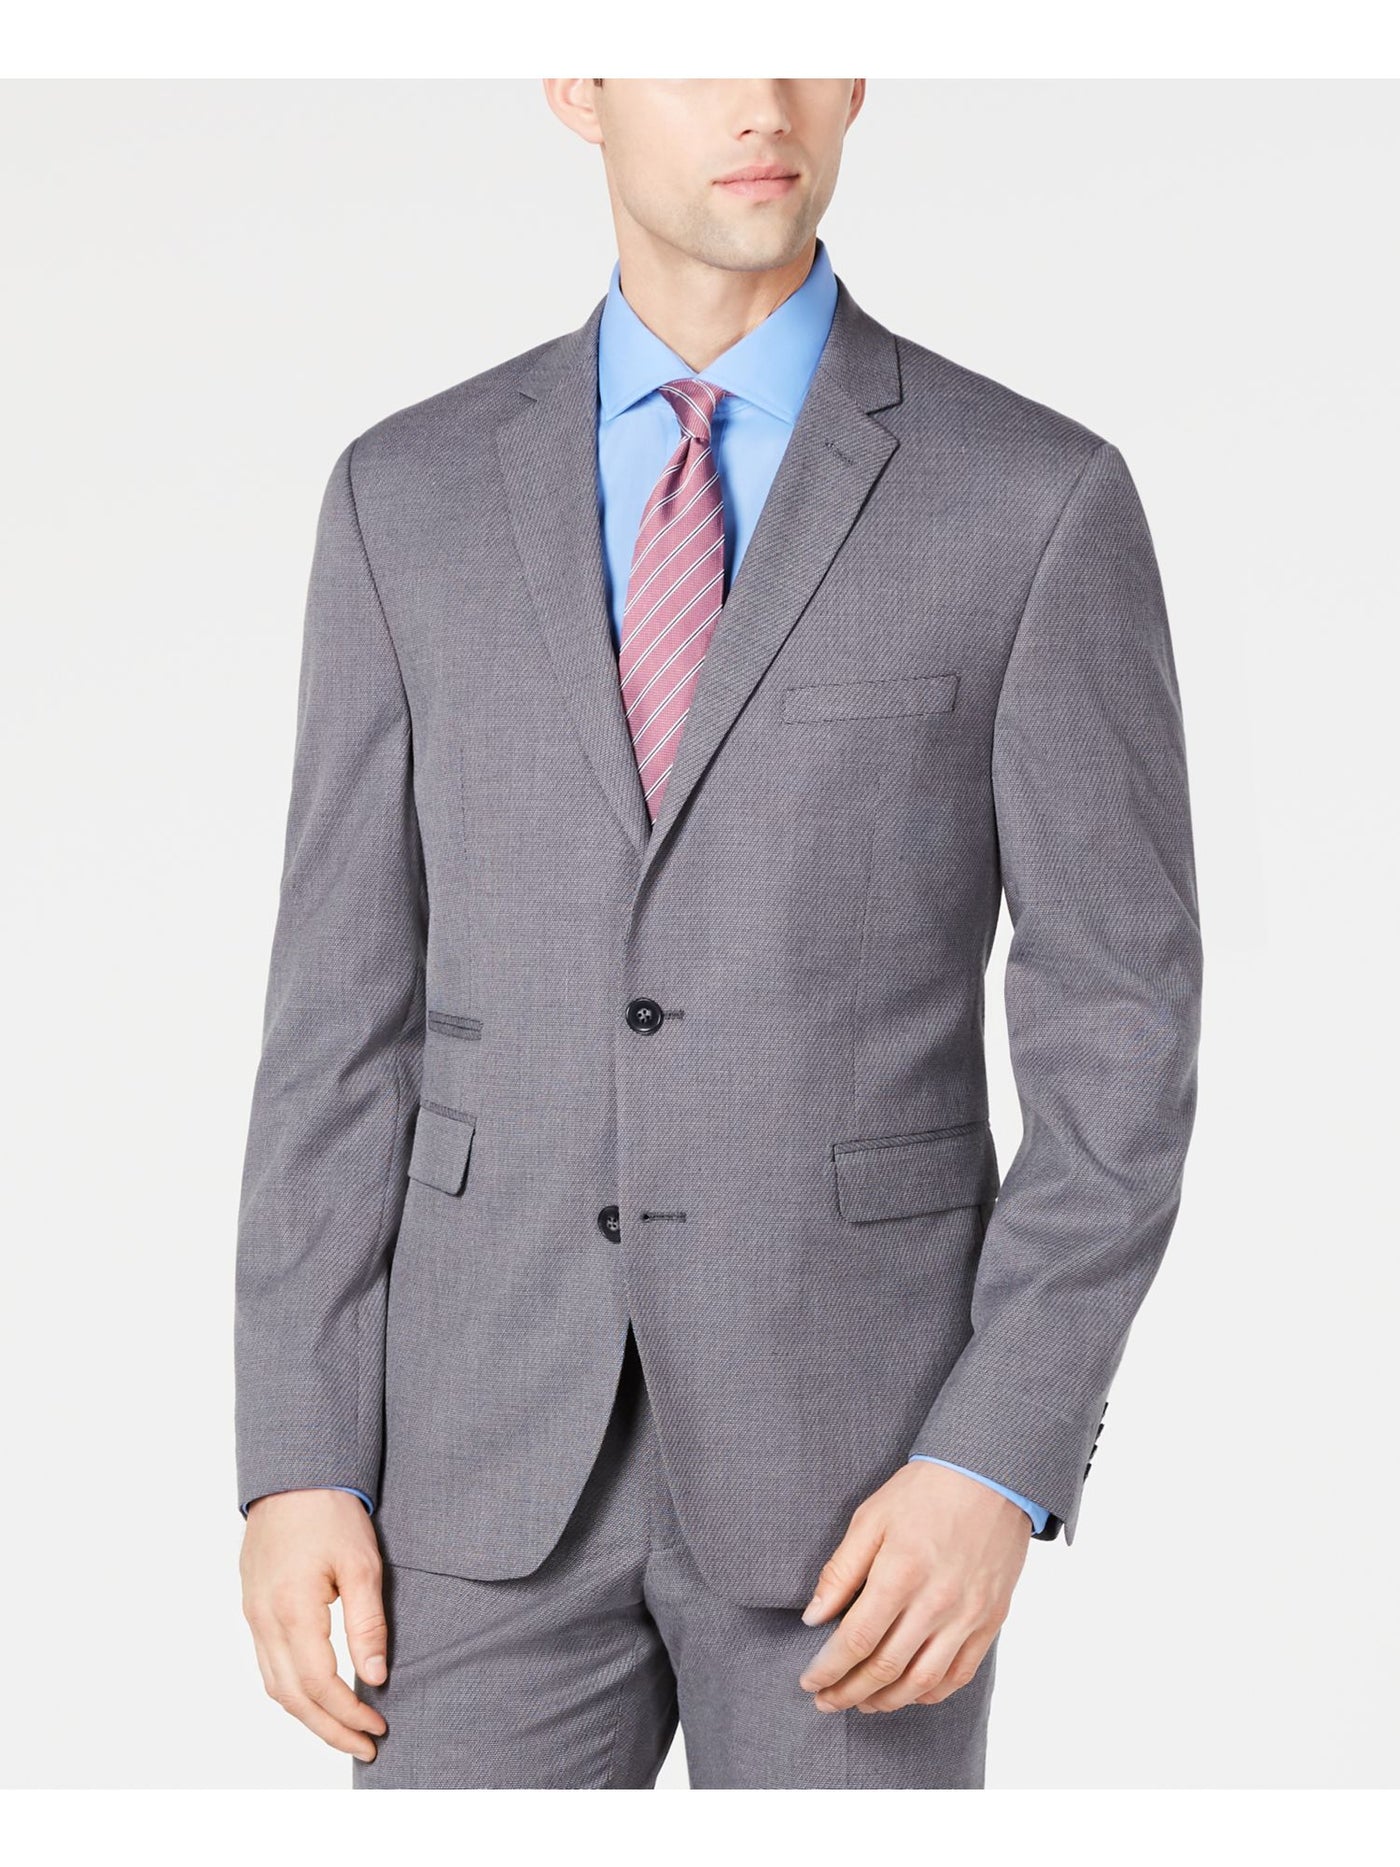 VINCE CAMUTO Mens Gray Single Breasted, Stretch, Slim Fit Wrinkle Resistant Suit Separate Blazer Jacket 48L